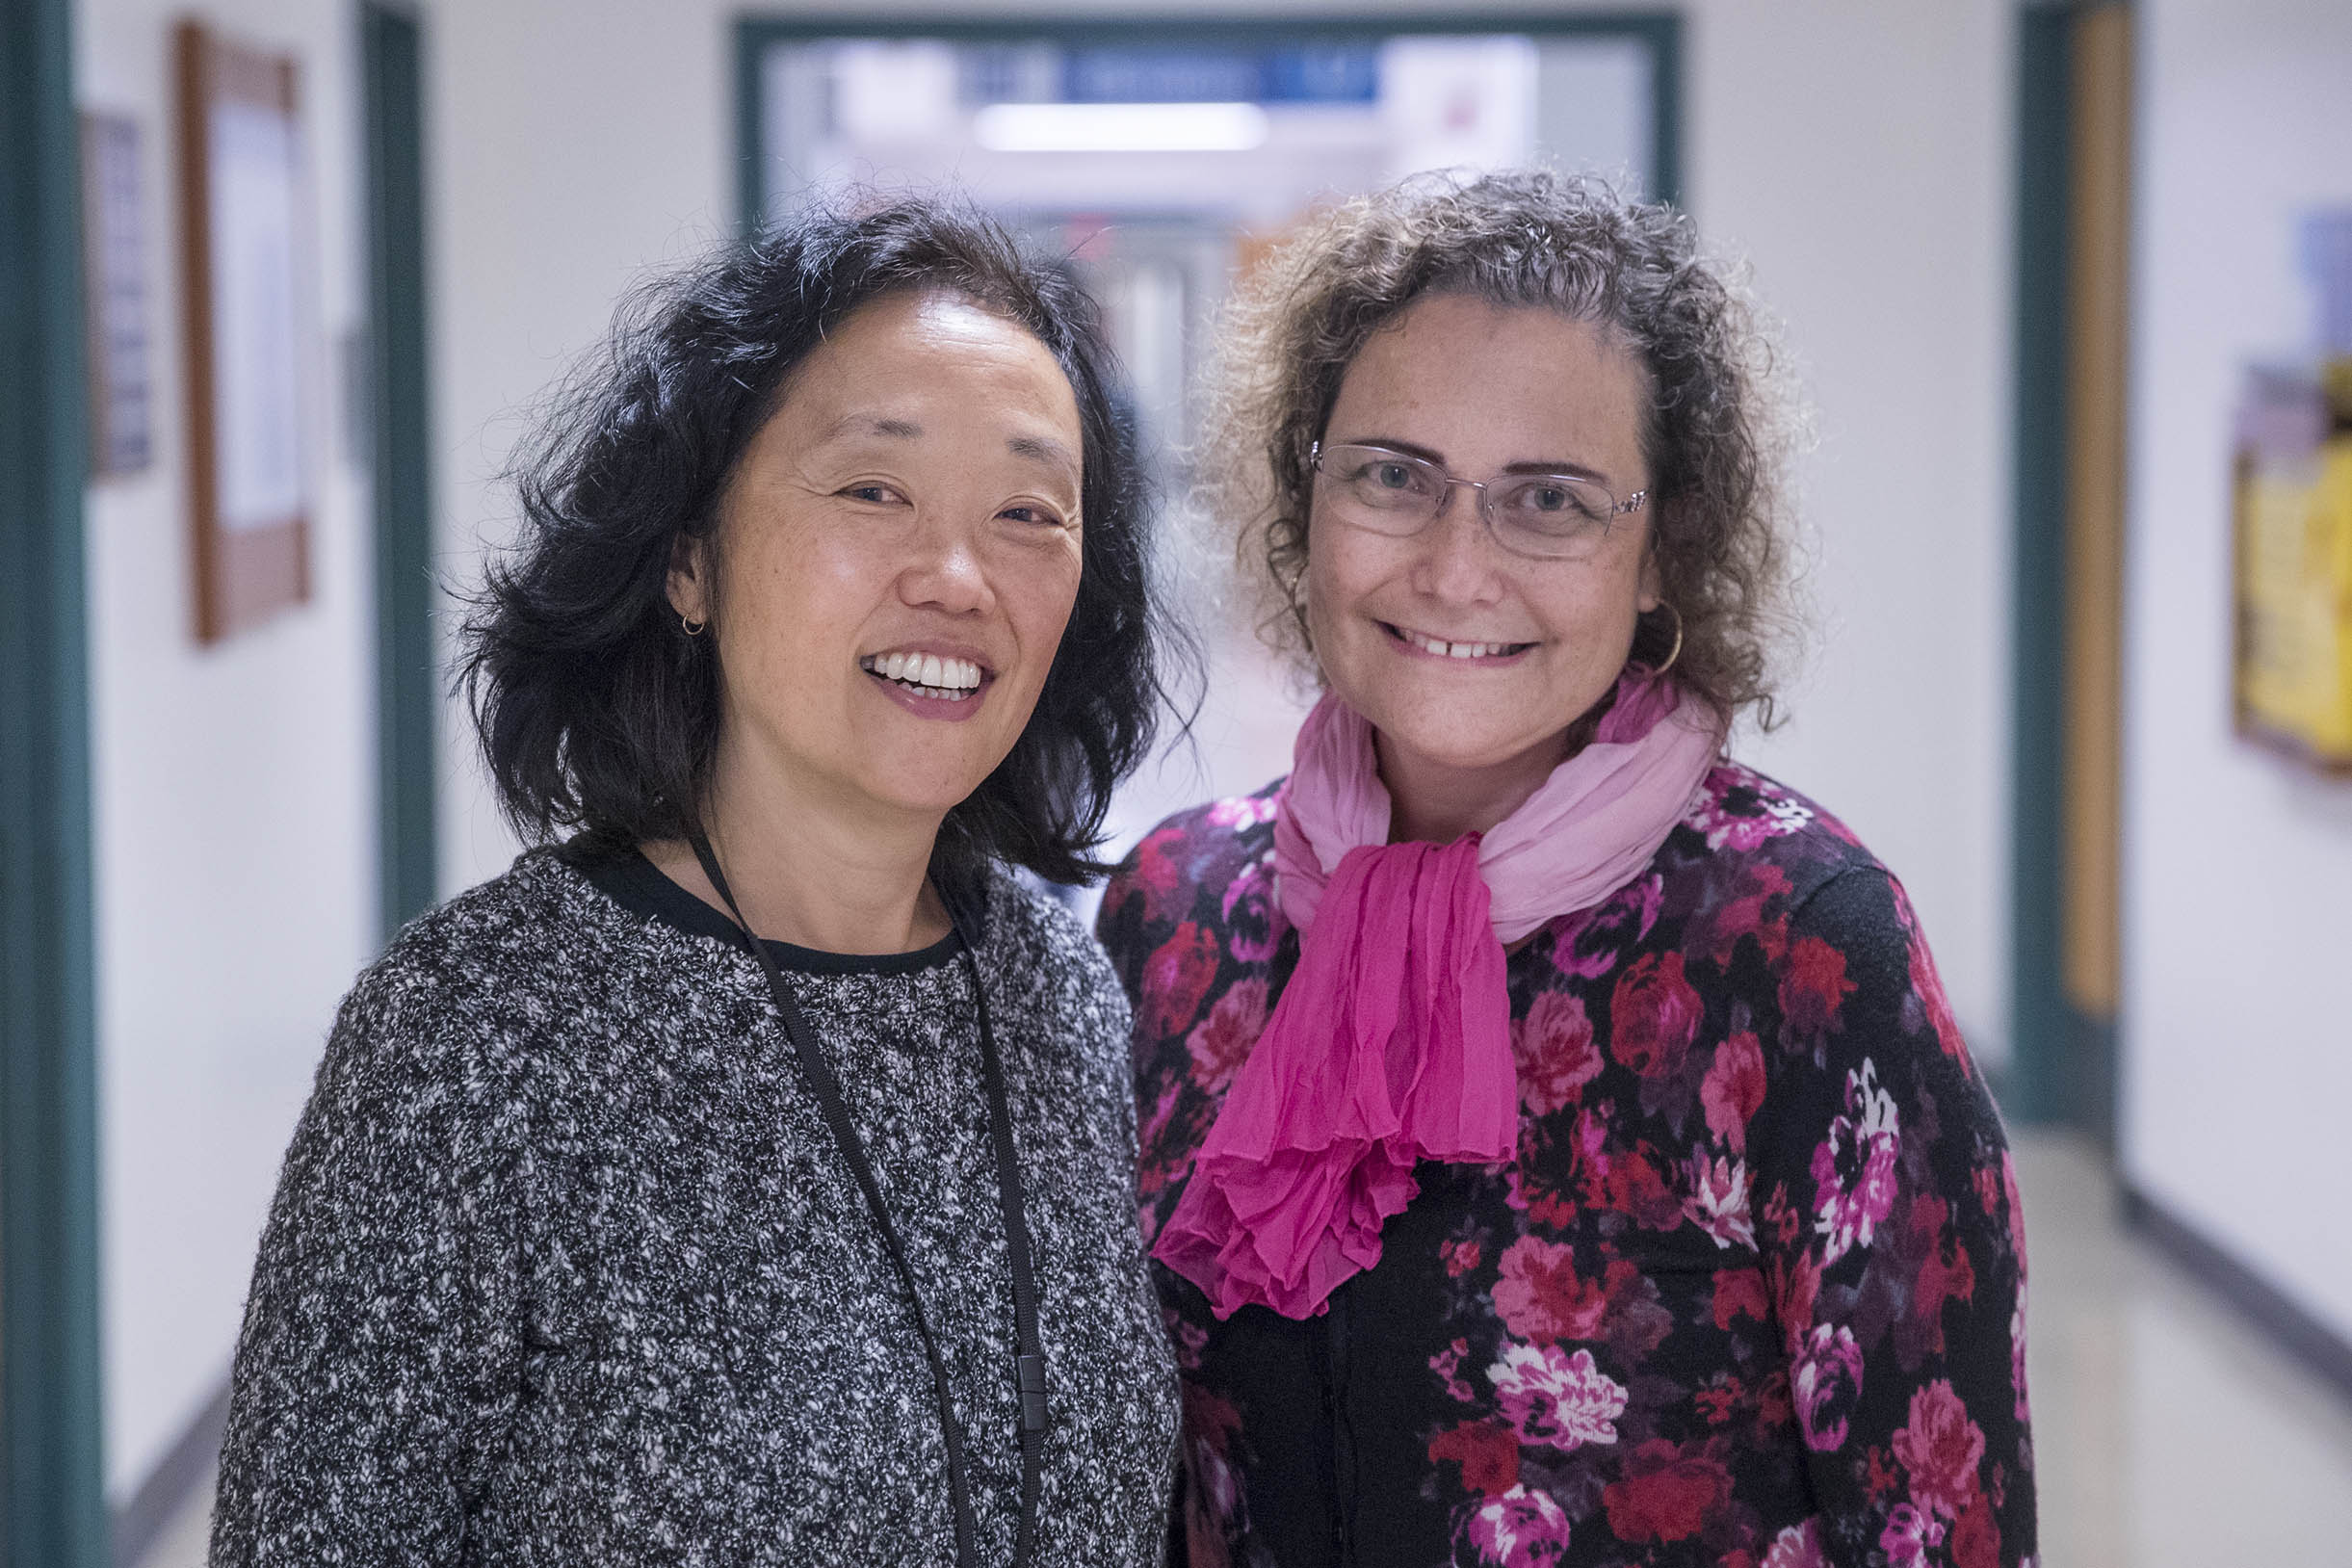 Dr. Rachel Moon, left, and Dr. Fern Hauck stand together looking at the camera